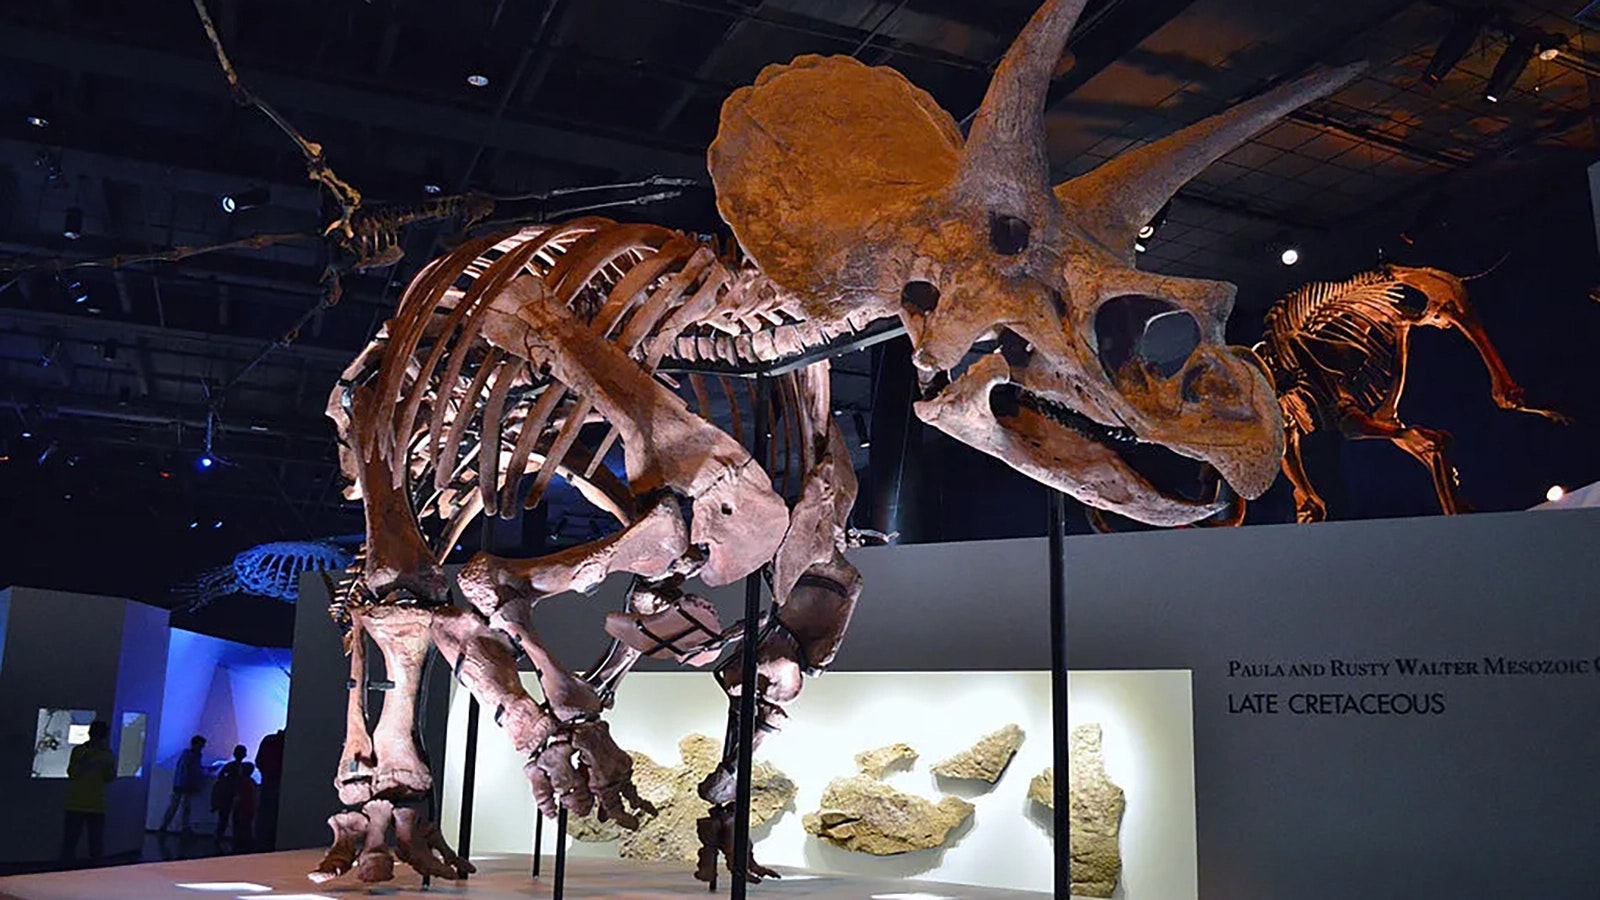 "Lane," a Triceratops on display at the Houston Museum of Natural Sciences. This specimen, found in Niobrara County, is one of the most complete ever found and included the first fossils of Triceratops skin.